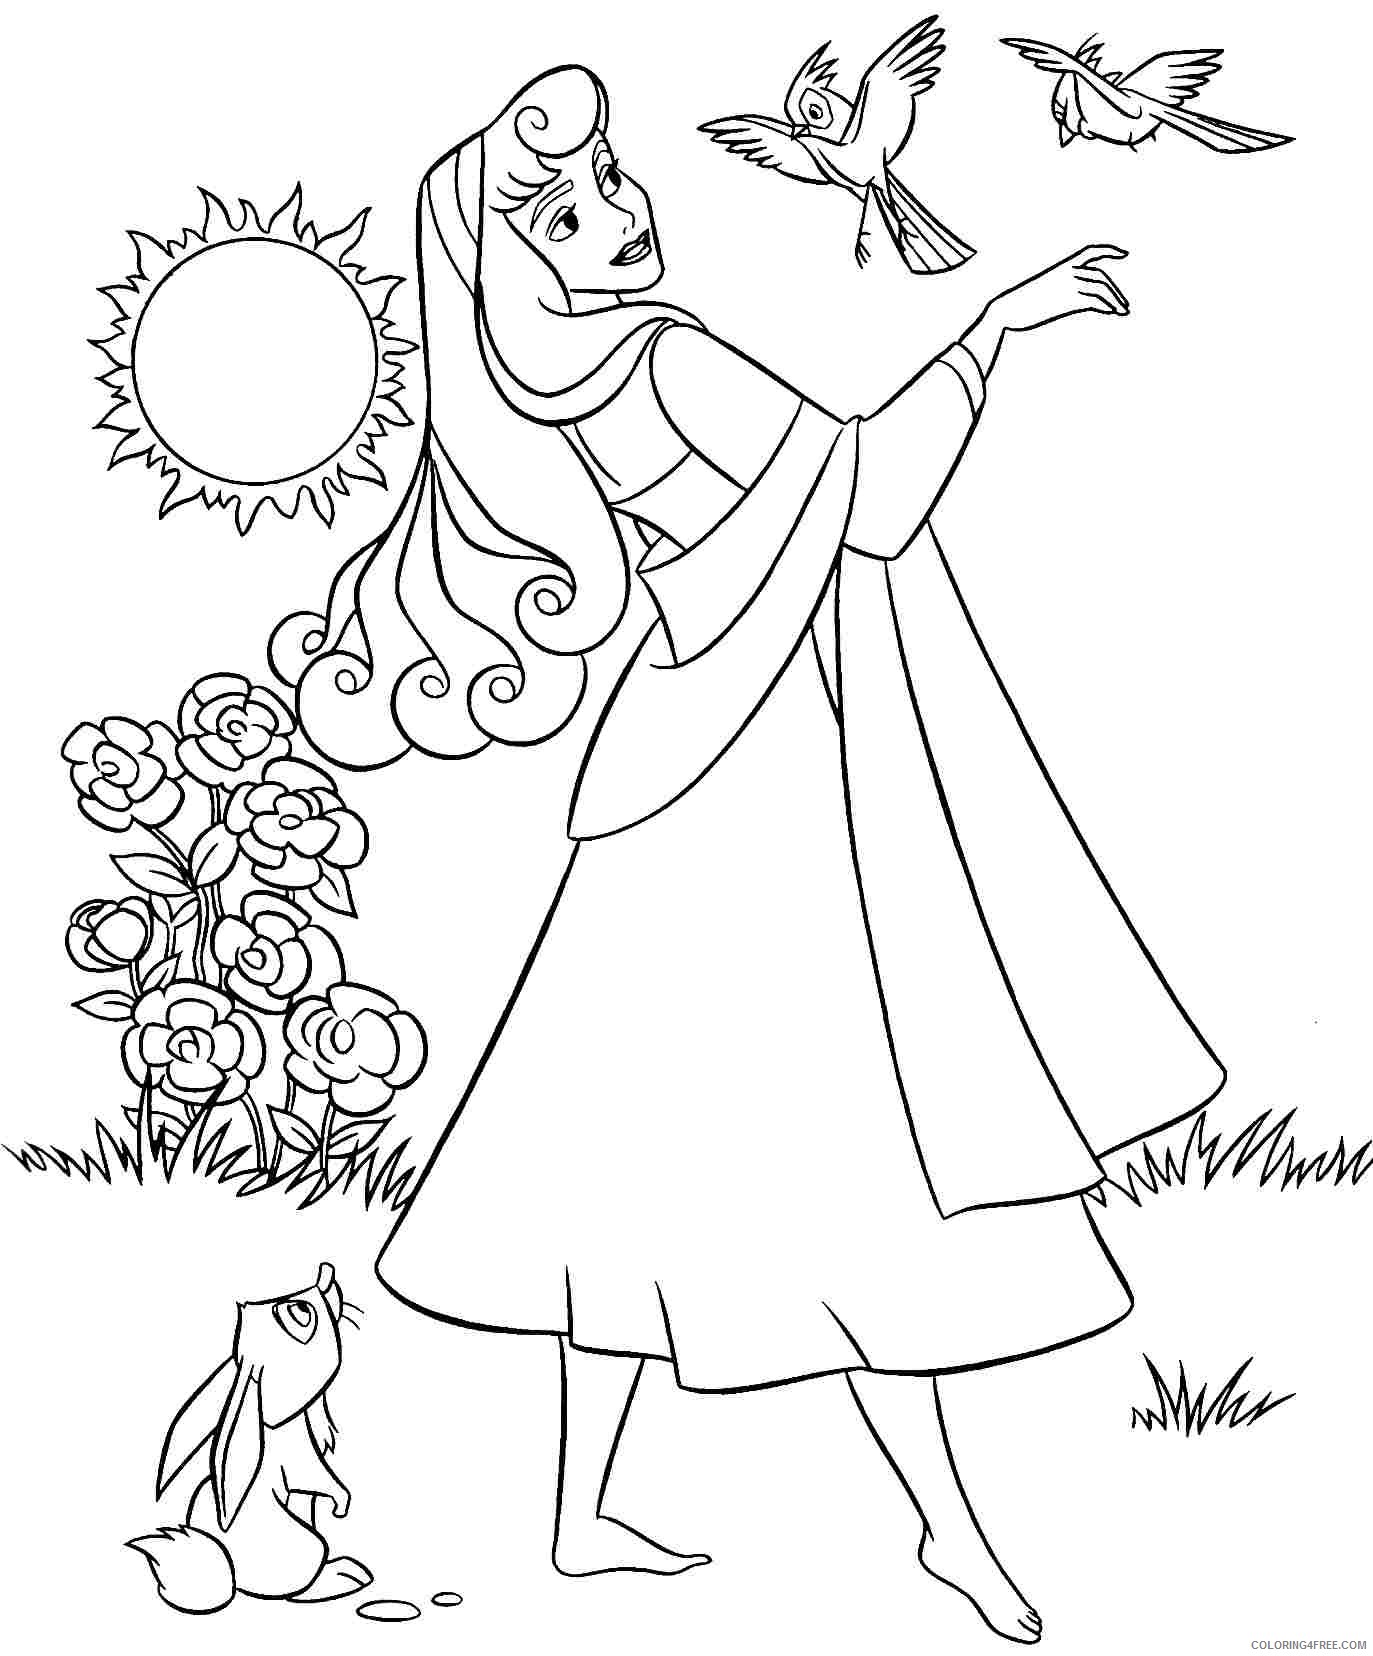 aurora coloring pages with forest animals Coloring4free